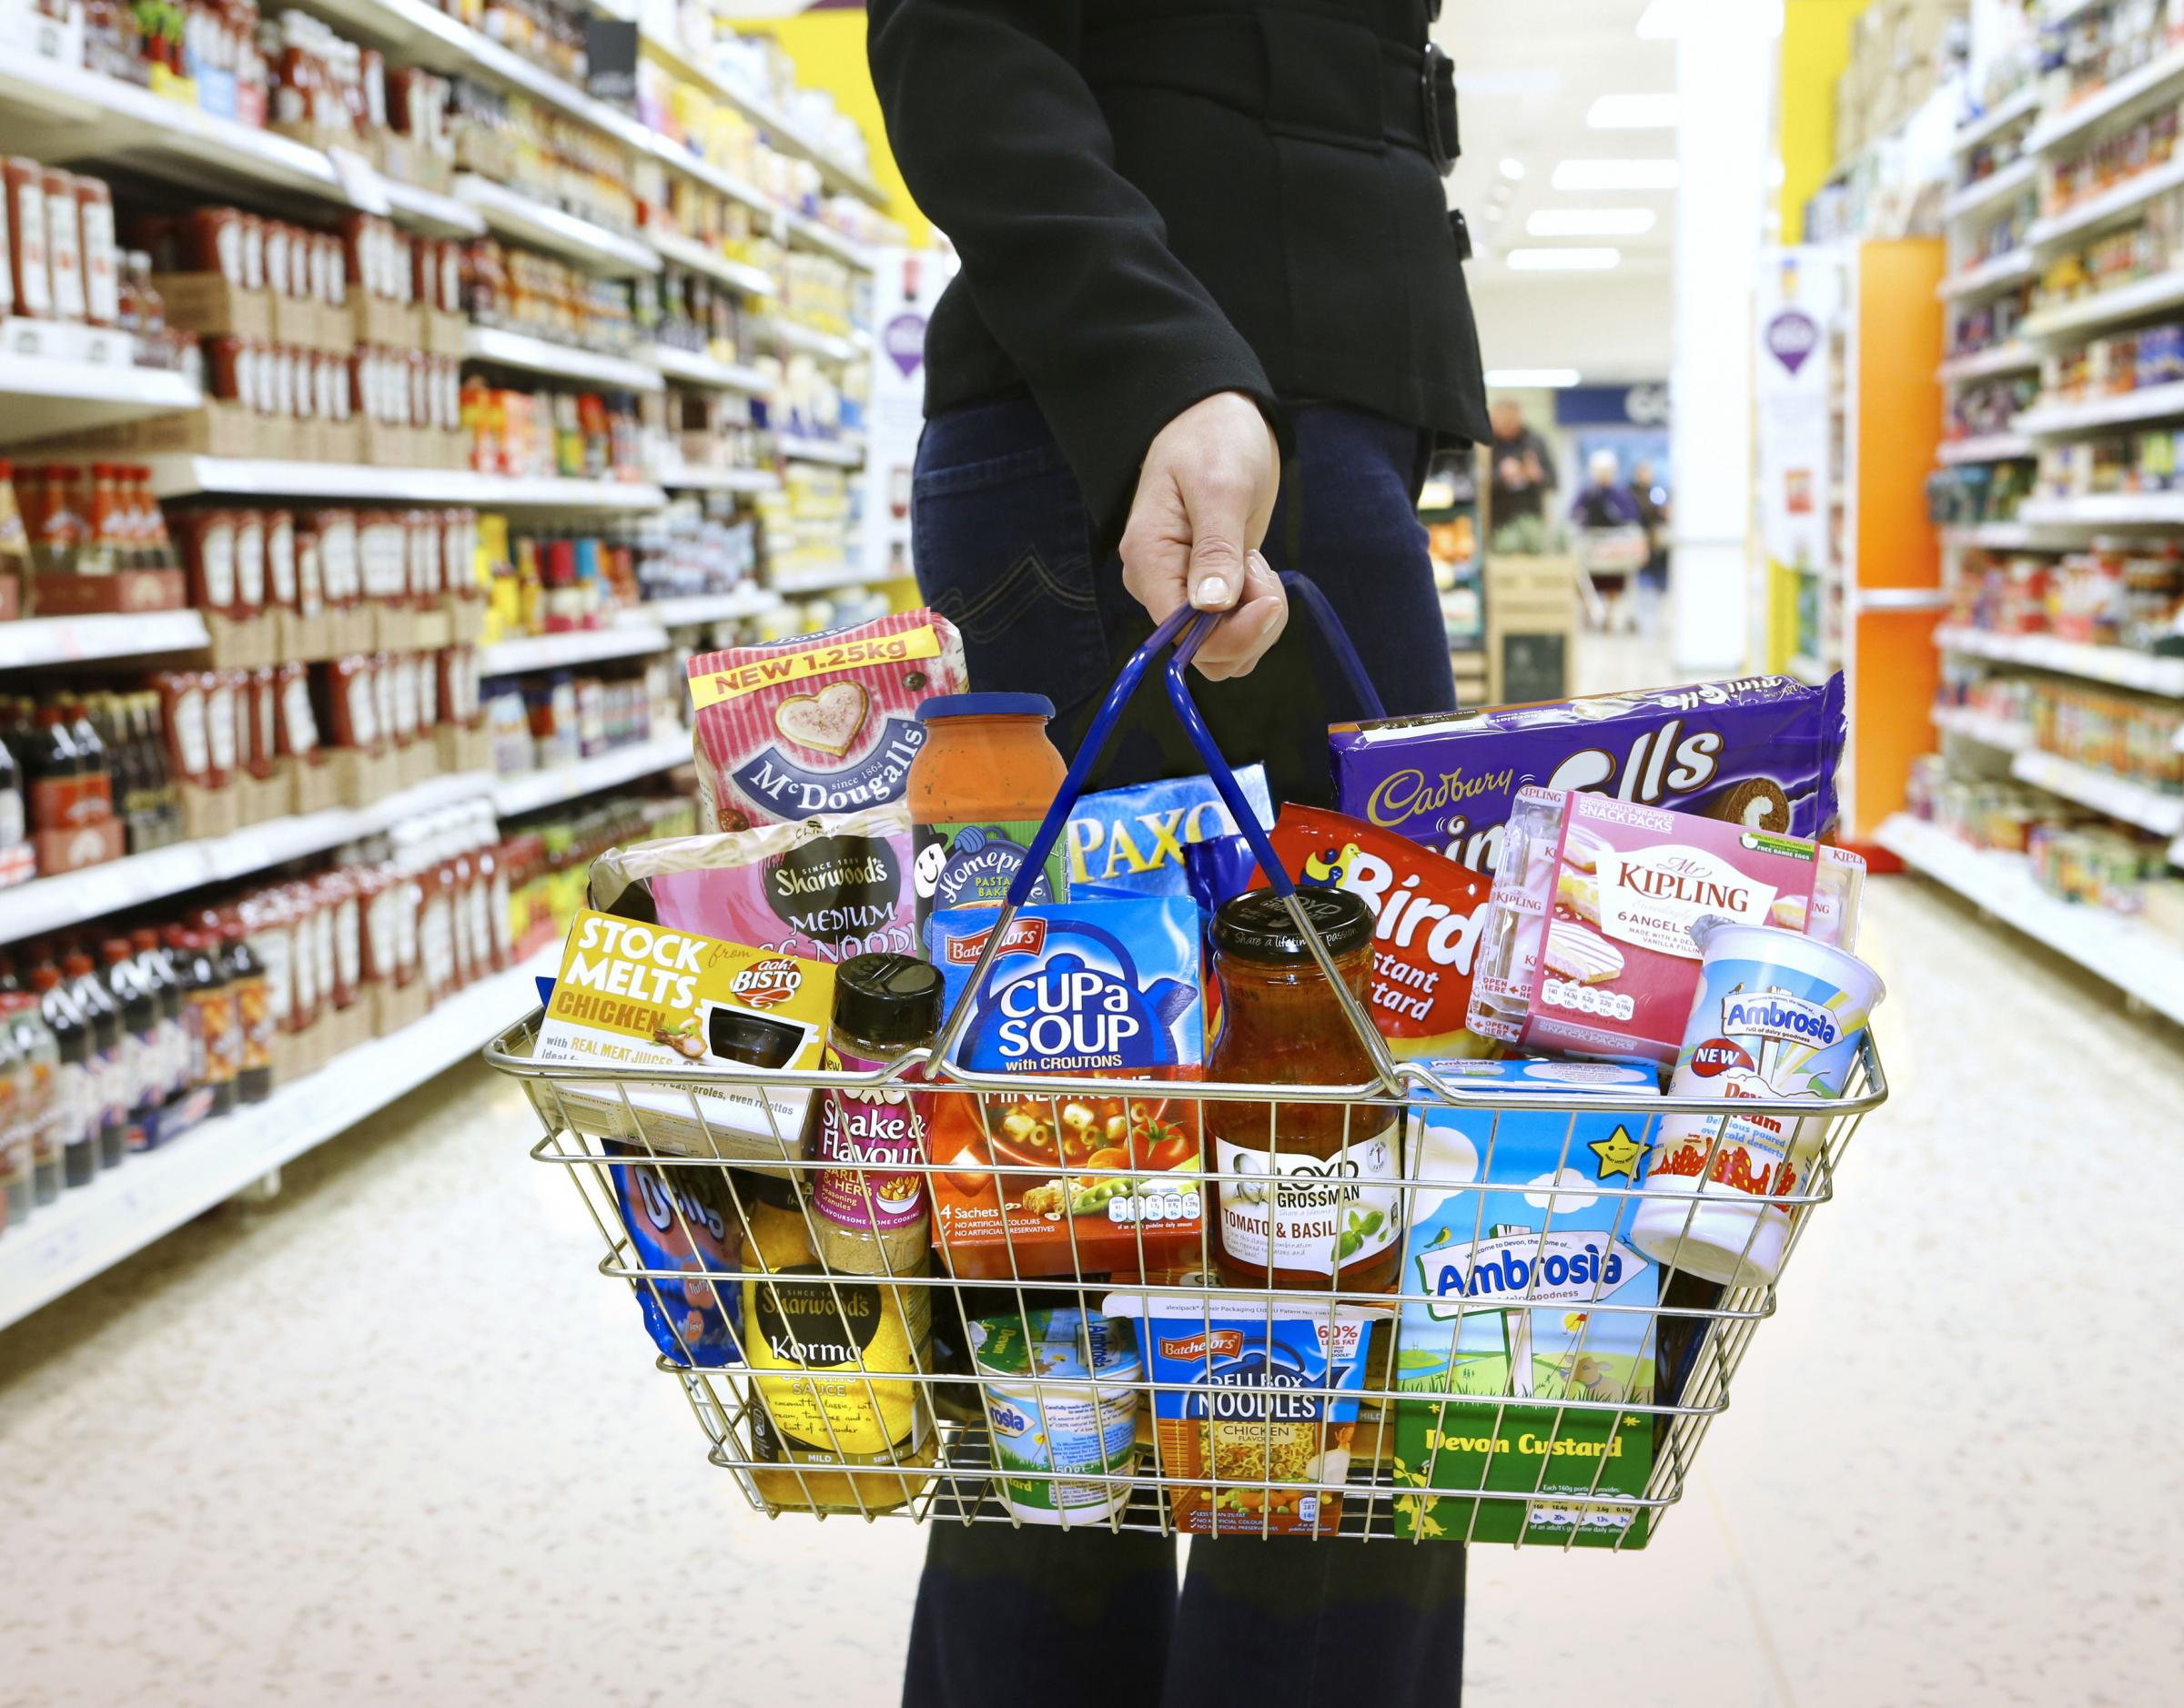 Best time to shop at Tesco, Asda, Sainsbury's, Aldi and Lidl